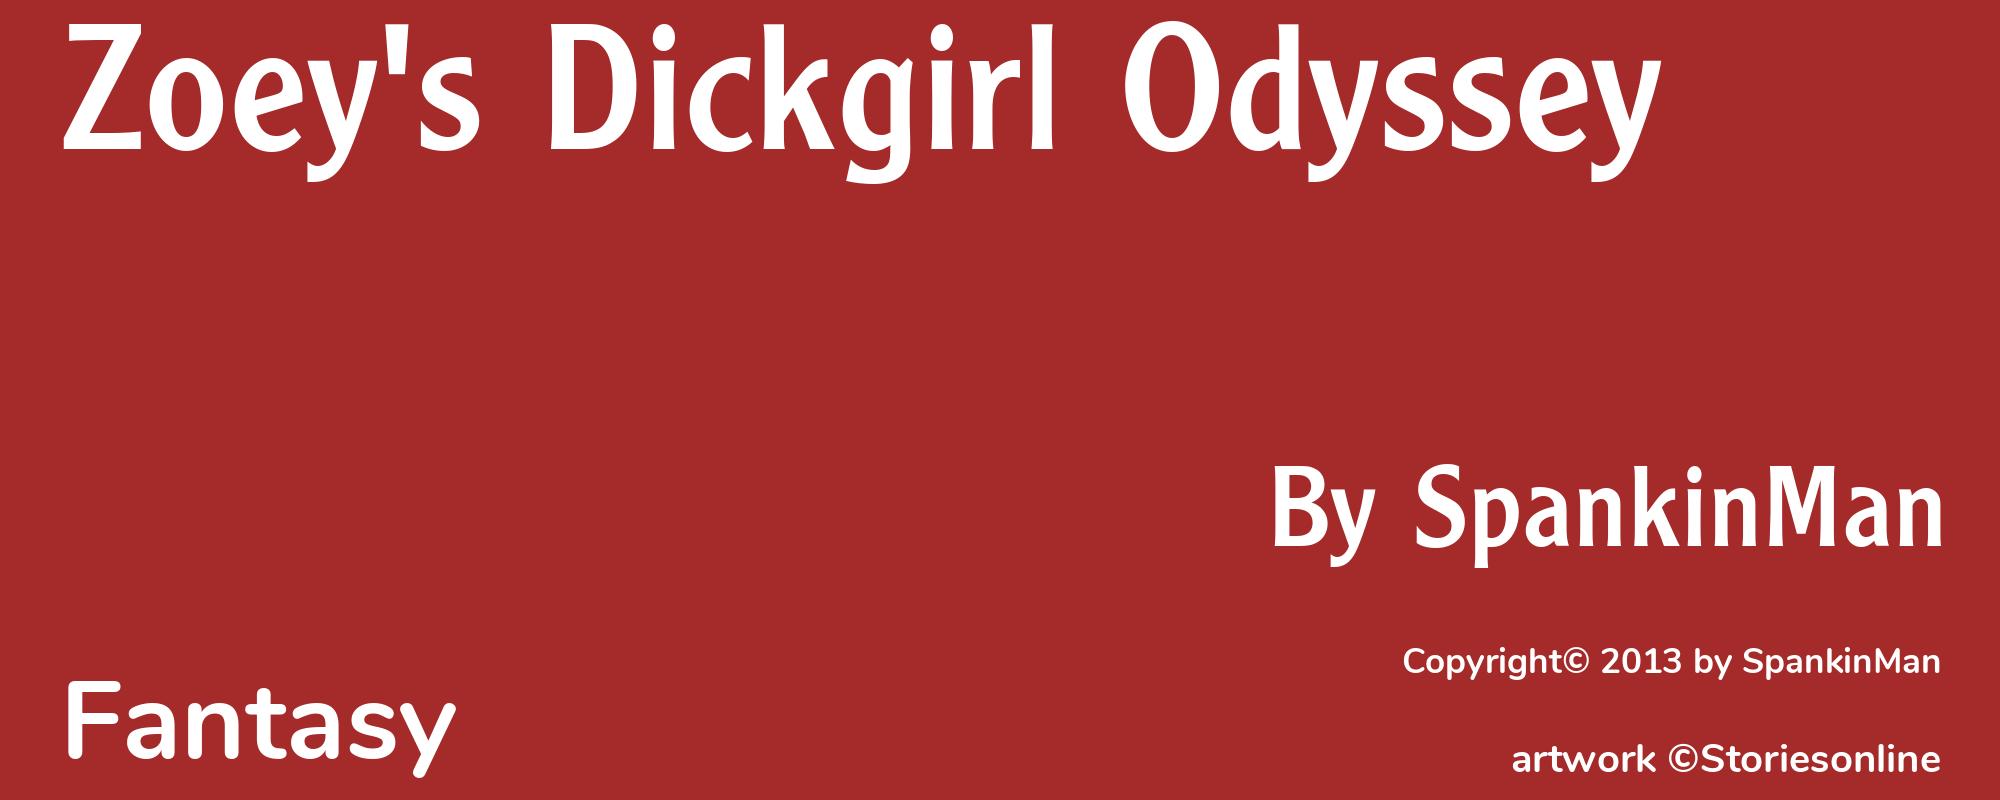 Zoey's Dickgirl Odyssey - Cover